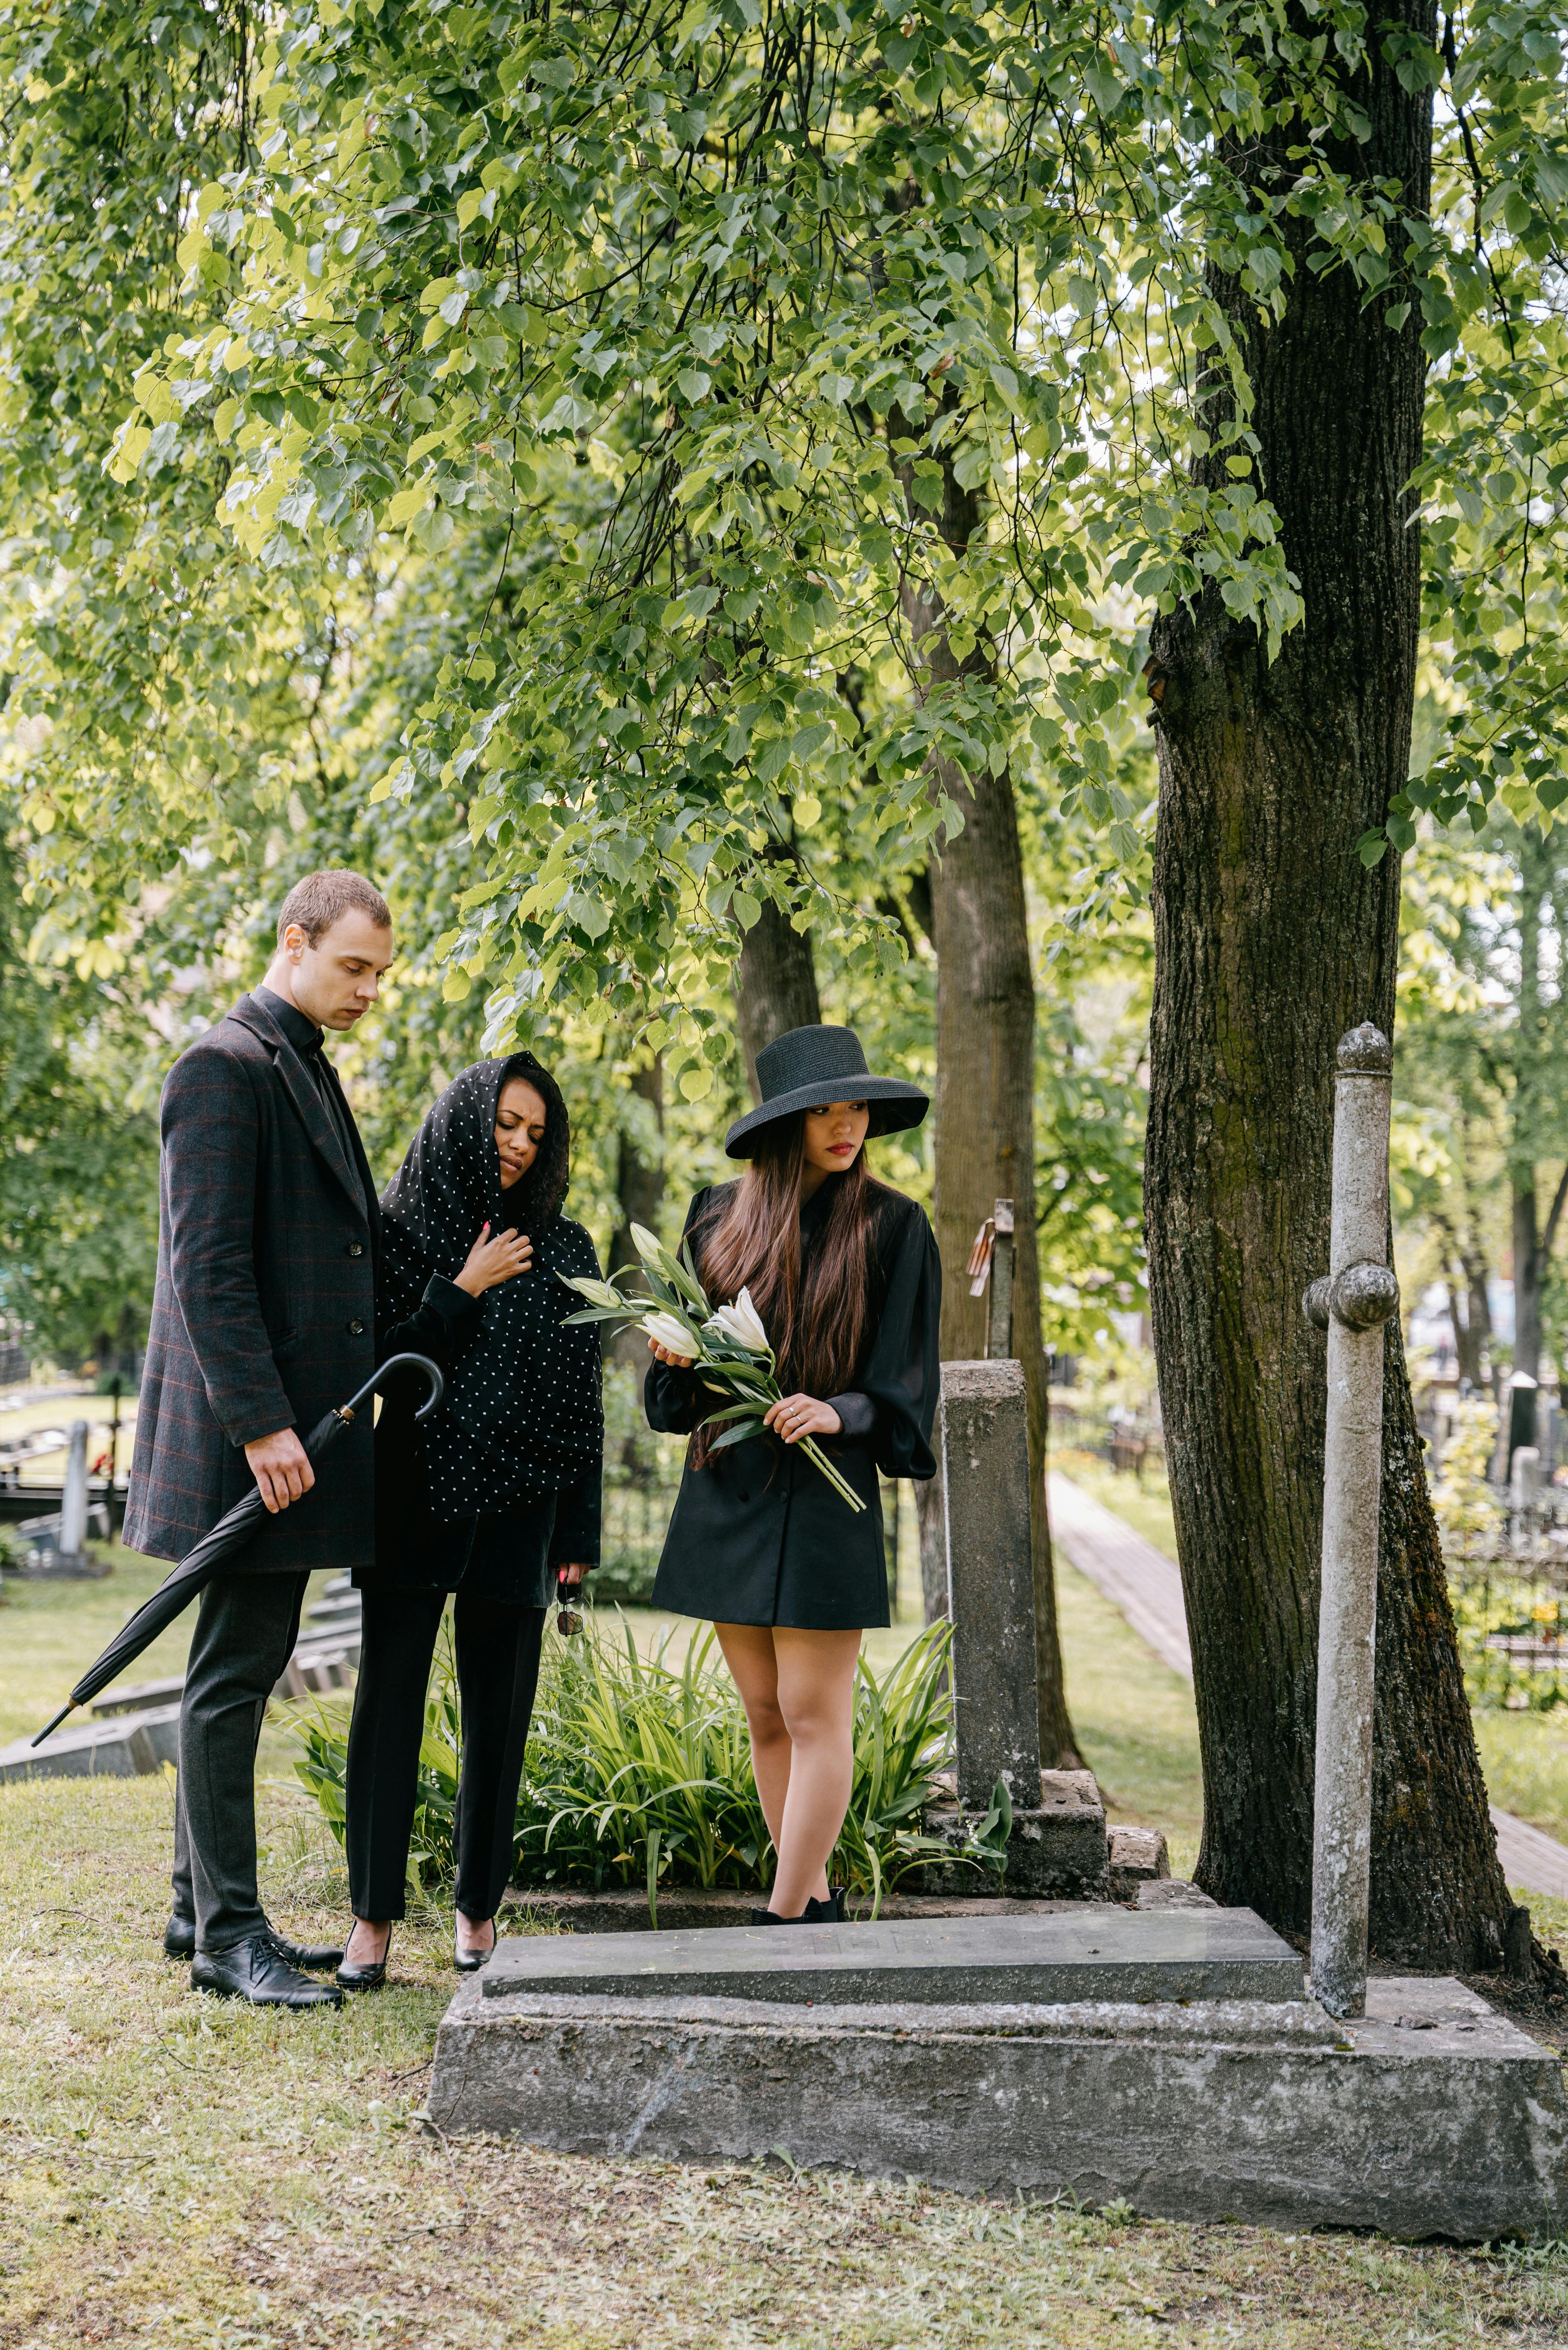 A family at a funeral | Source: Pexels